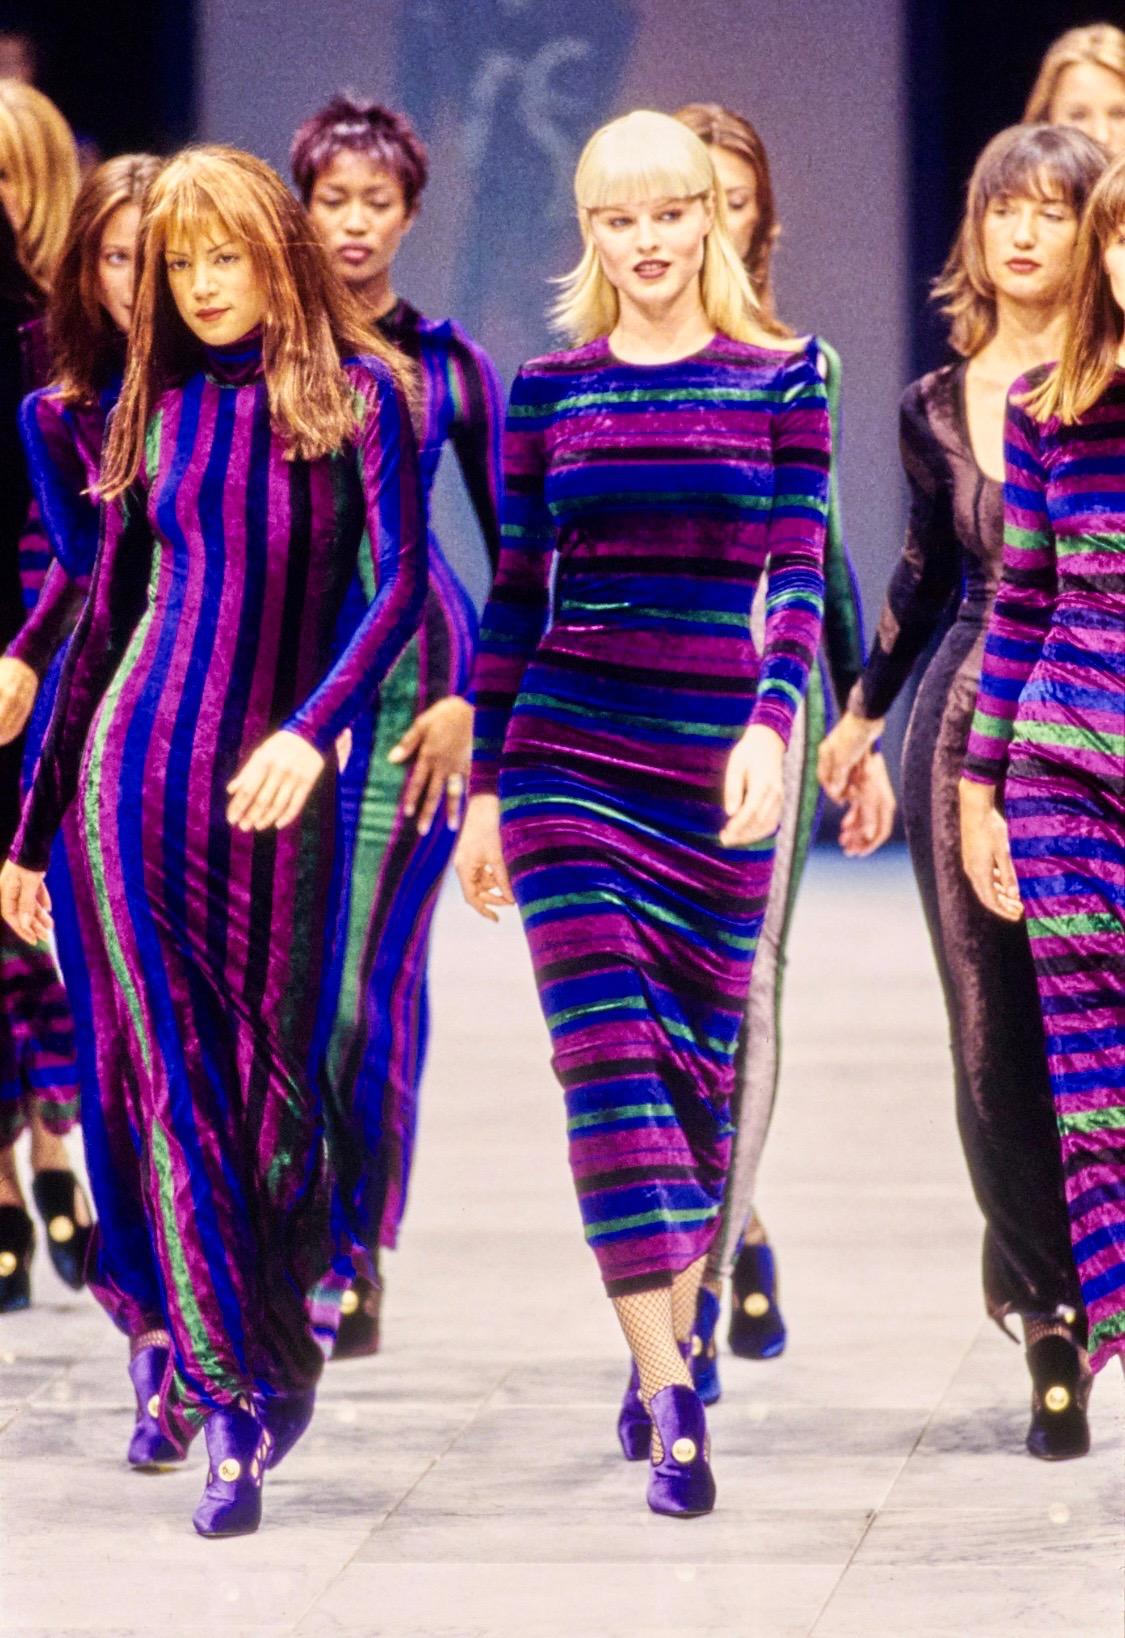 Presenting a vibrant striped velvet Gianni Versace Couture mini dress, designed by Gianni Versace. The full-length version of this dress debuted as the finale look on the Fall/Winter 1993 runway, modeled by Naomi Campbell. The rich blues and purple